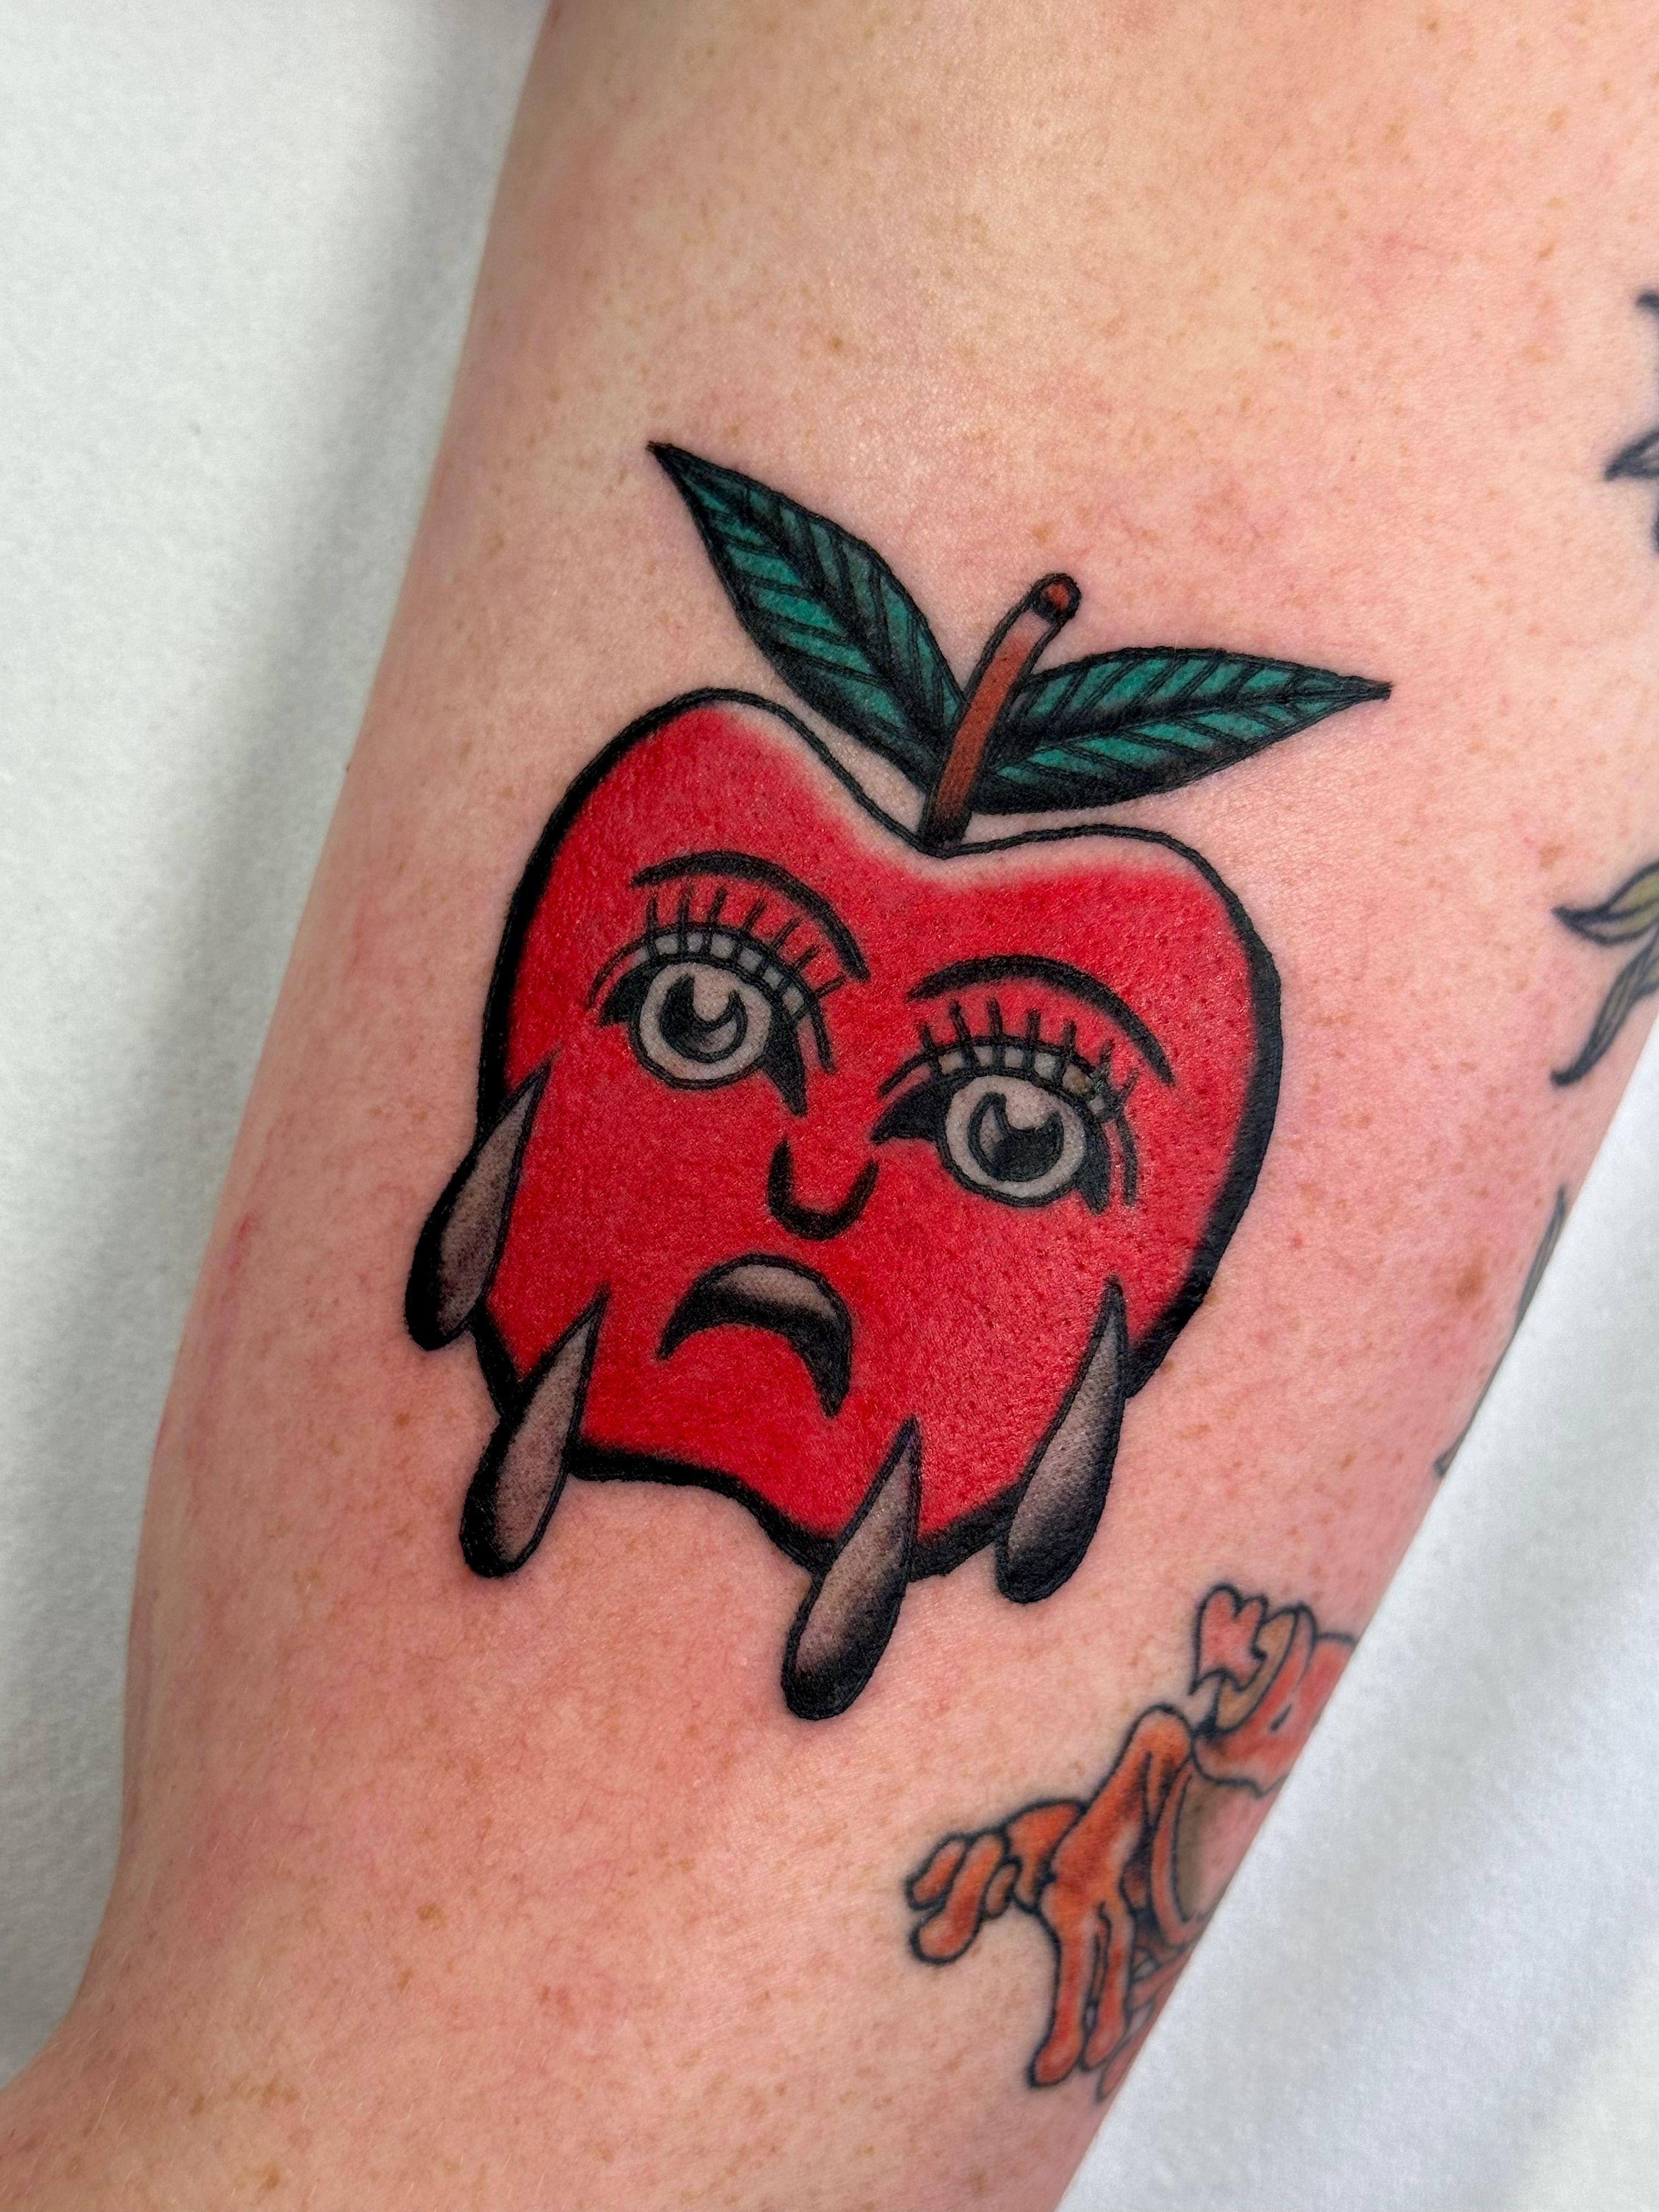 Studio 28 Tattoos and Piercings - Sticker tattoos are a really fun trend  right now and Bo had a blast with this classic NY apple one! #tattoo #inked  #tattoos #tattooed #tattooart #tattooartist #